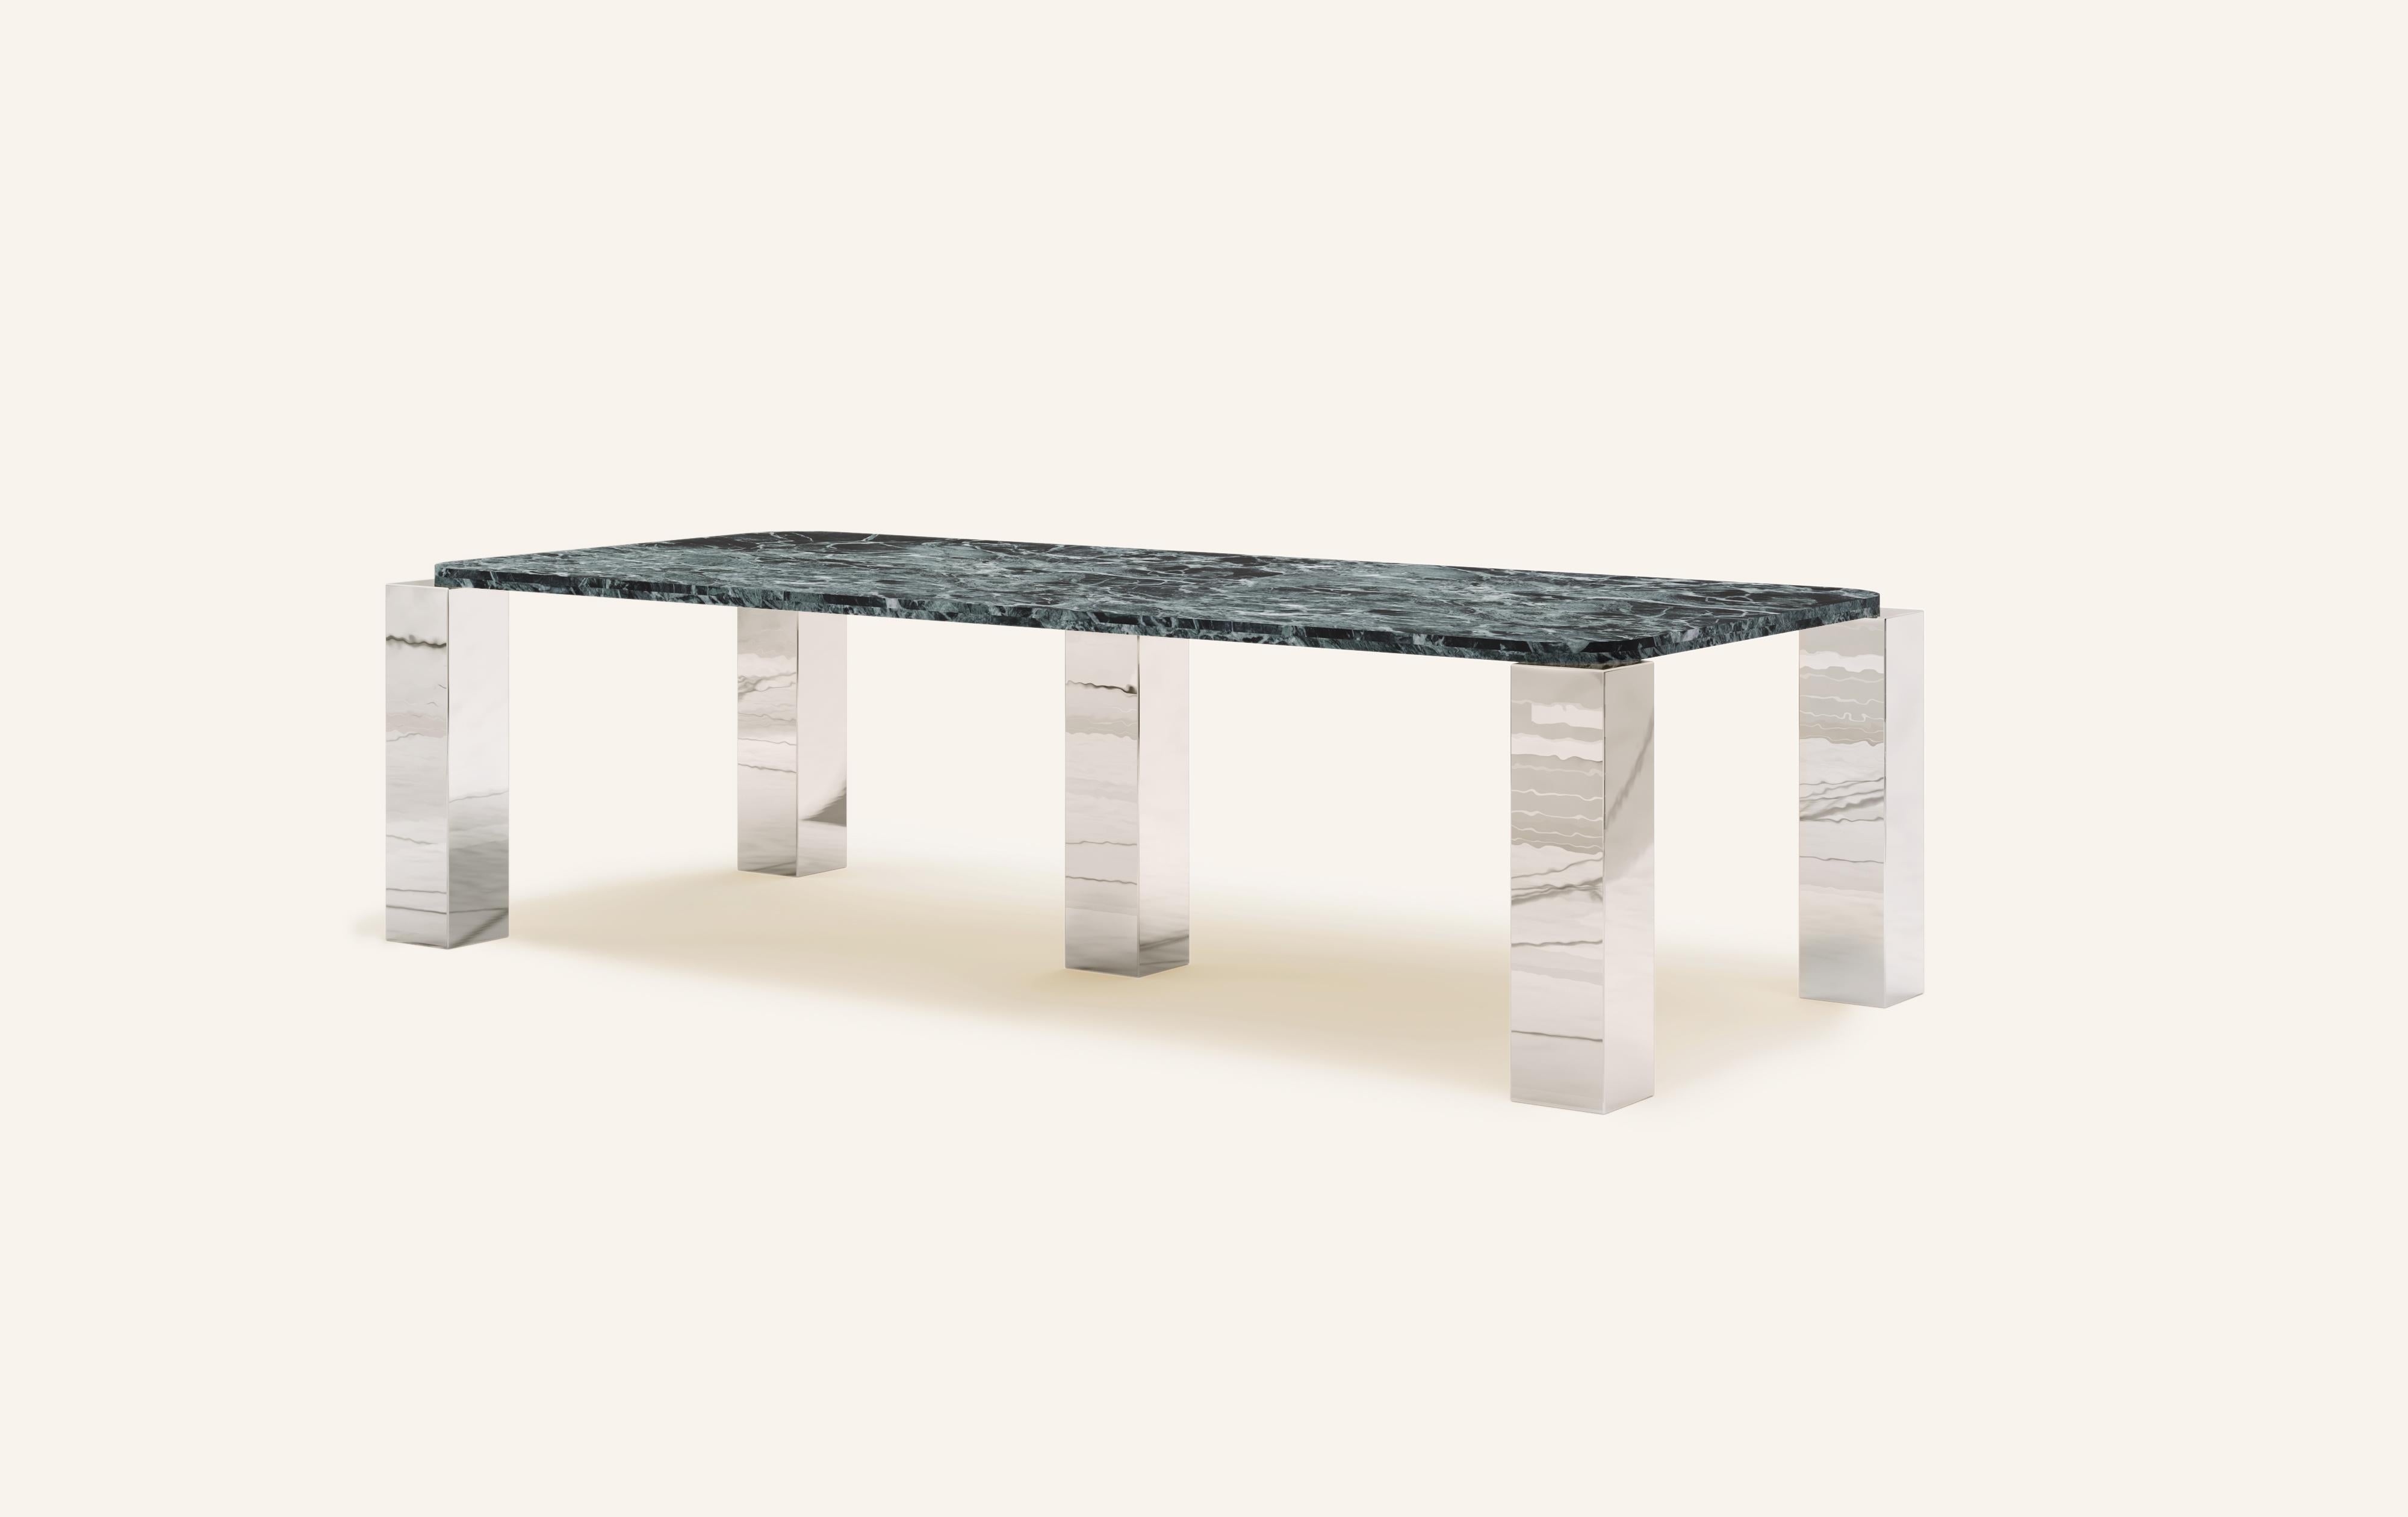 Organic Modern FORM(LA) Cubo Rectangle Dining Table 120”L x 50”W x 30”H Verde Marble & Chrome For Sale